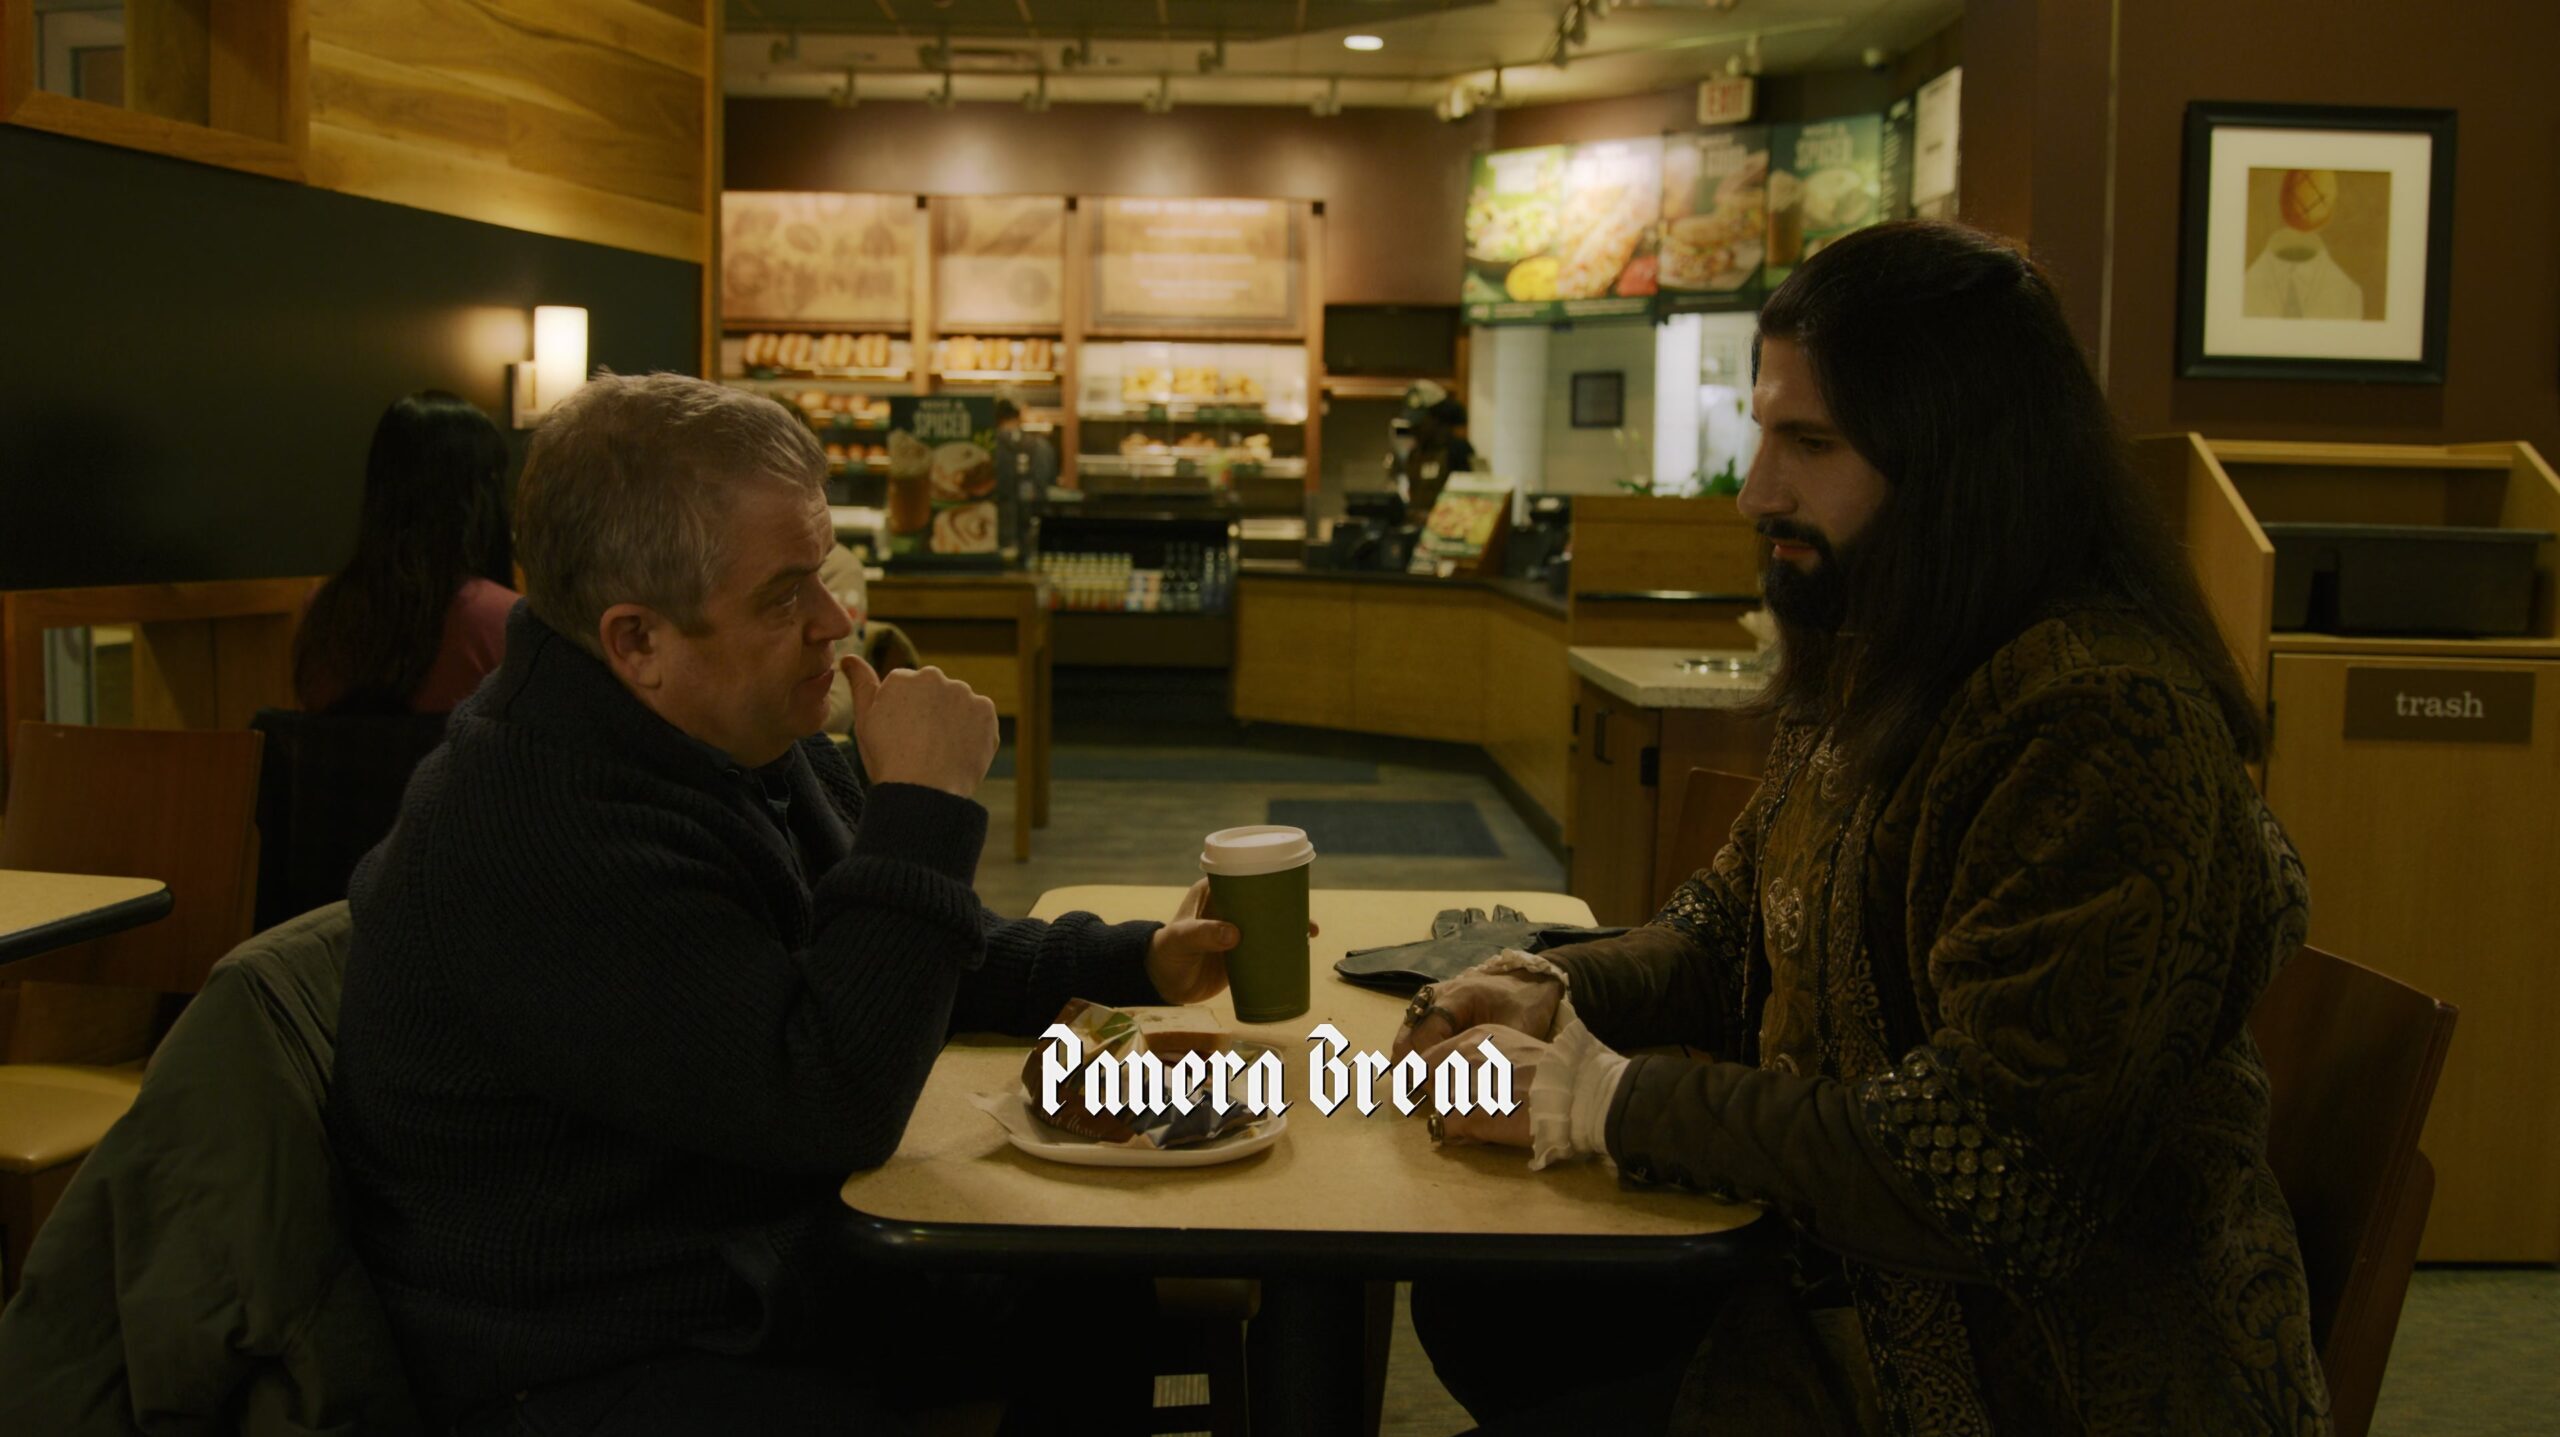 Panera Bread in What We Do in the Shadows